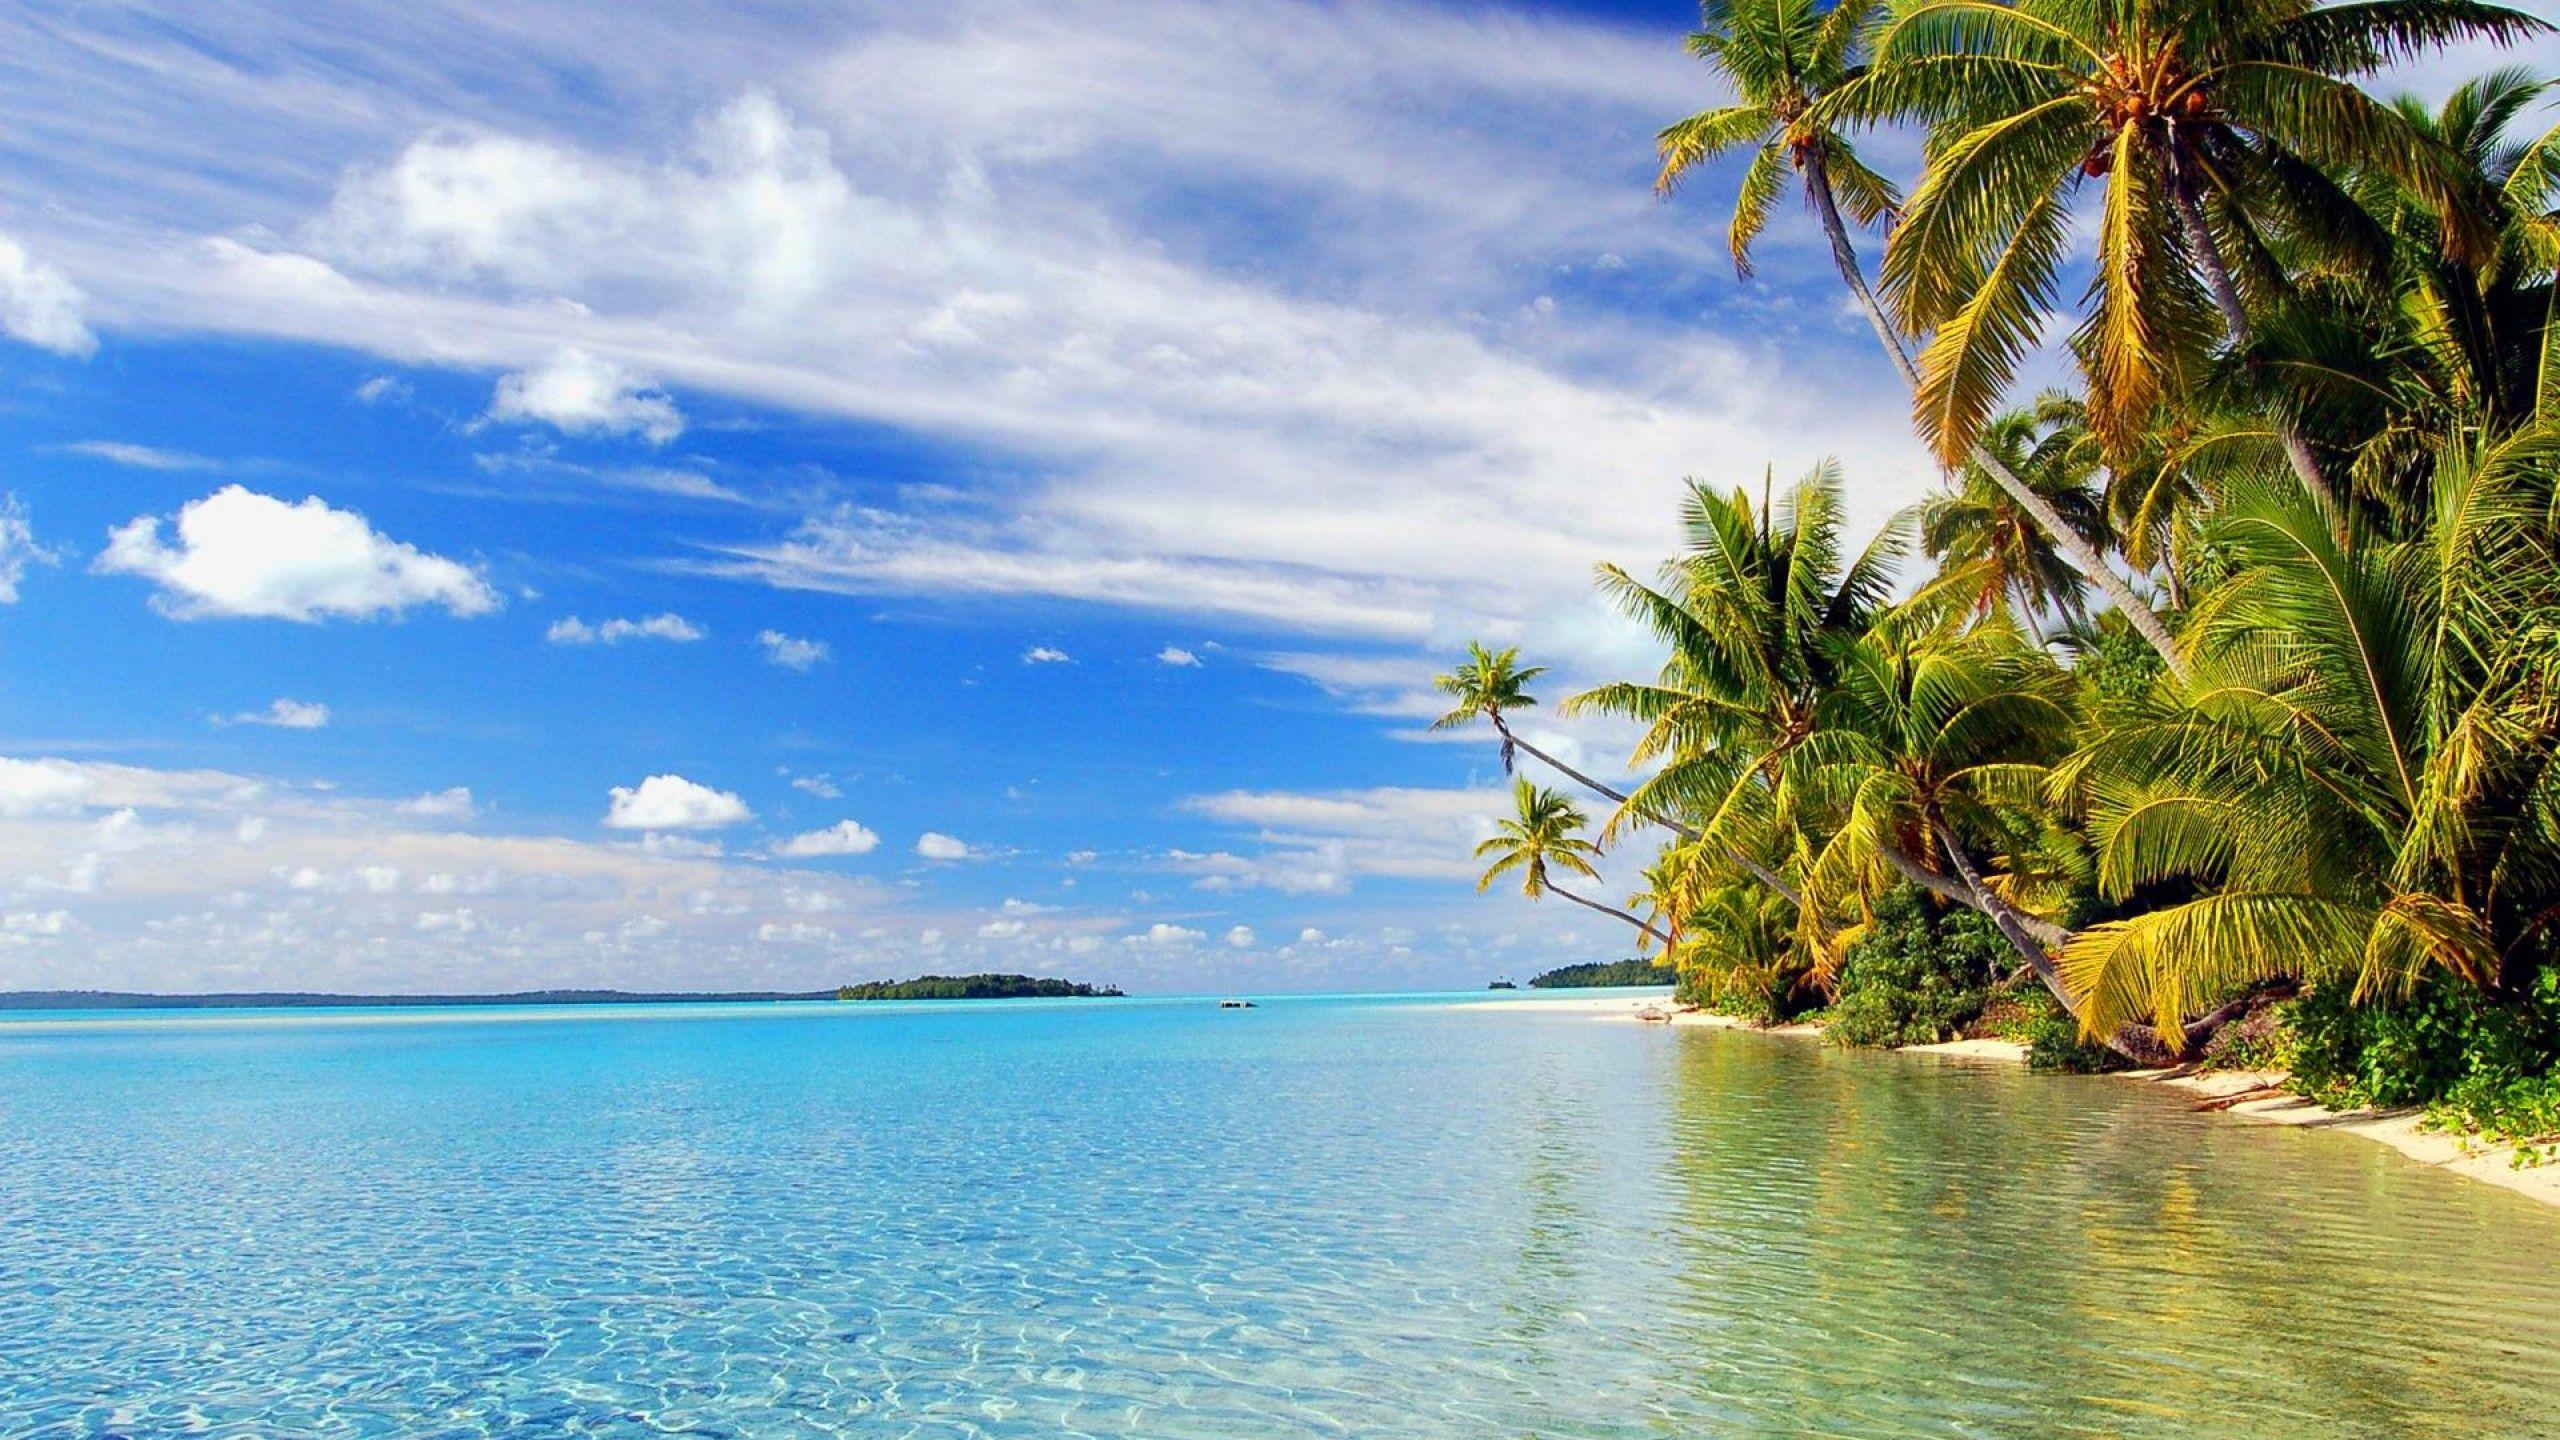  Tropical  Beach  Landscape Wallpapers  Top Free Tropical  